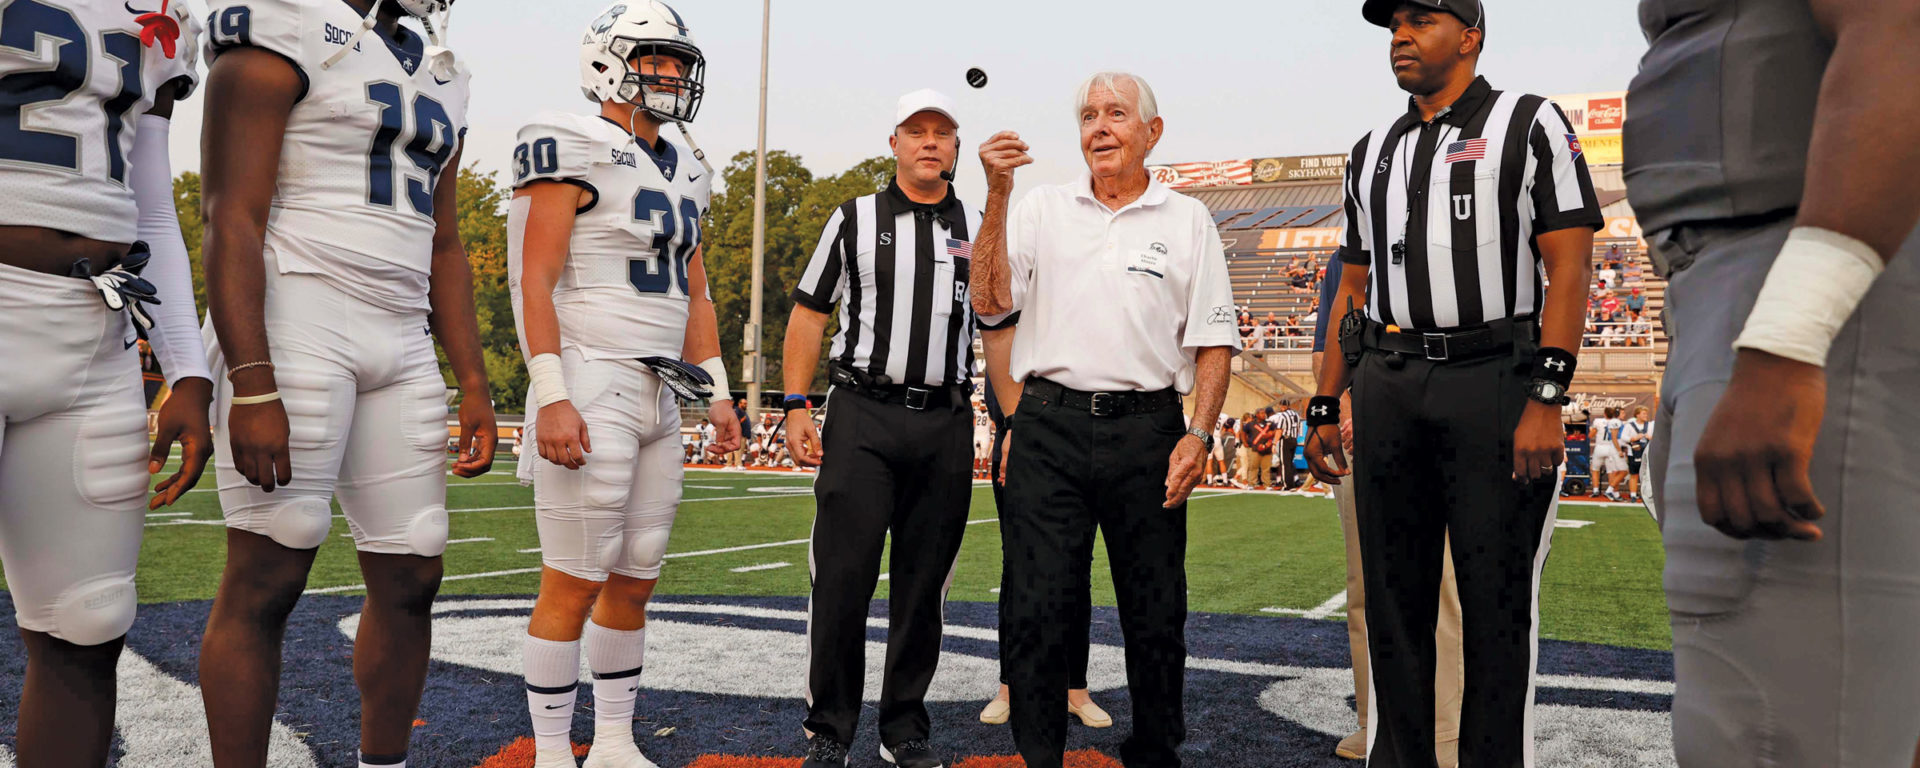 A man tosses a coin between two football referrees and captain of two teams